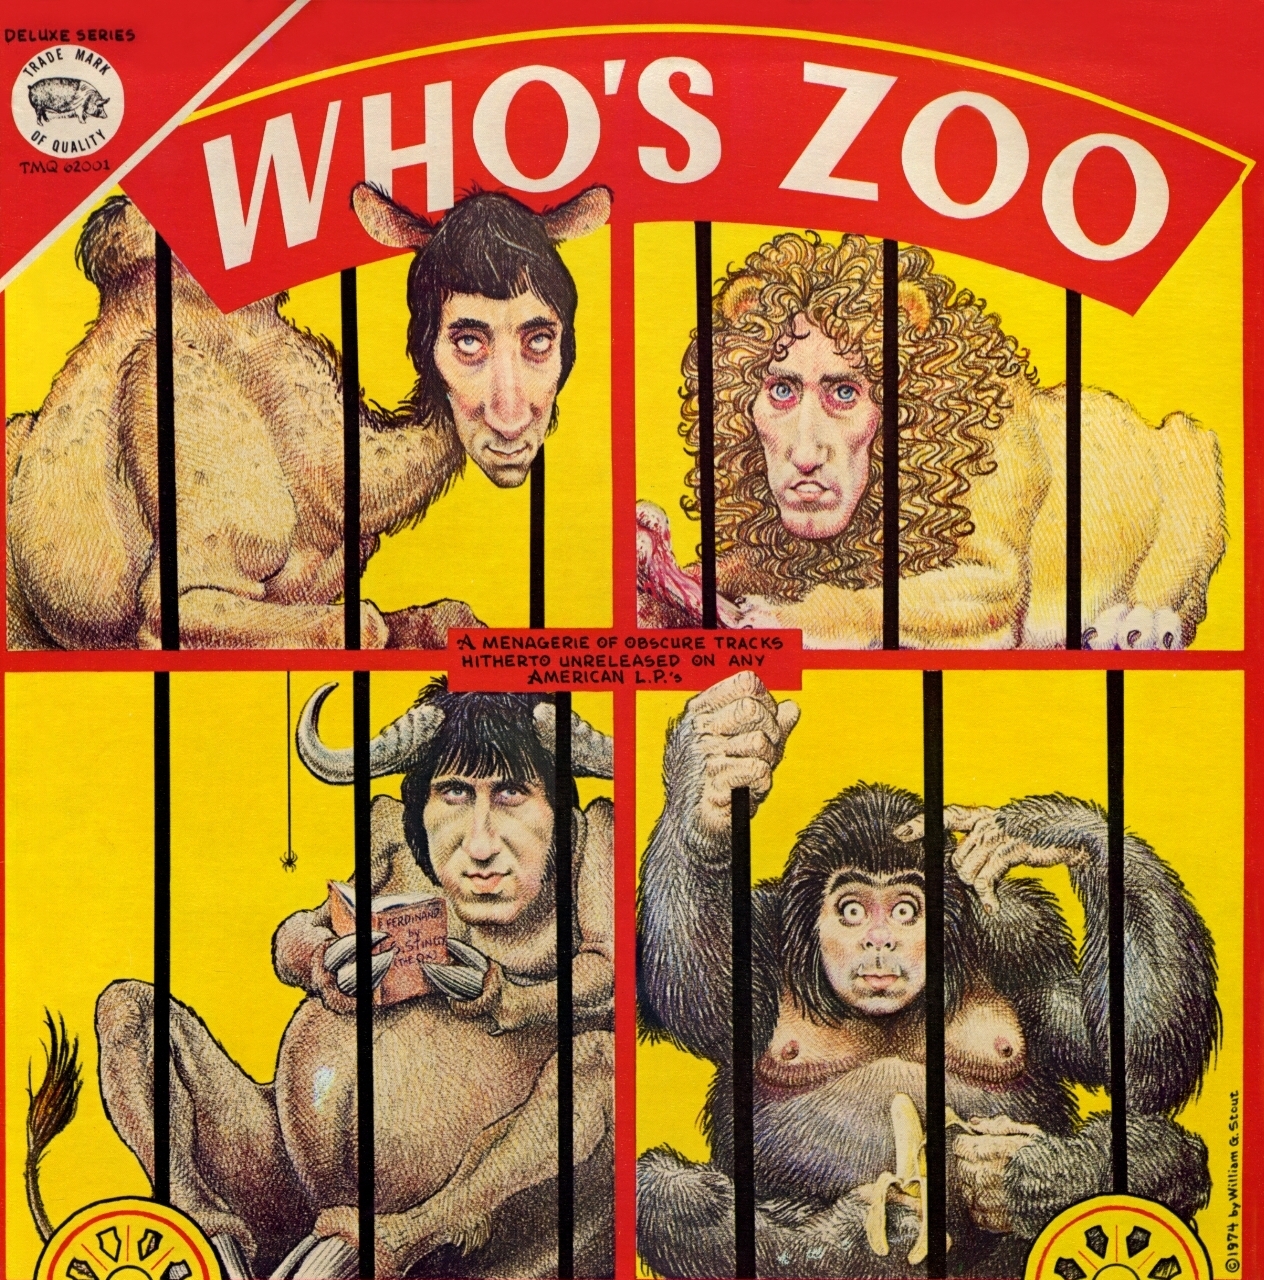 The Who - Who's Zoo - 08-06-65 - LP